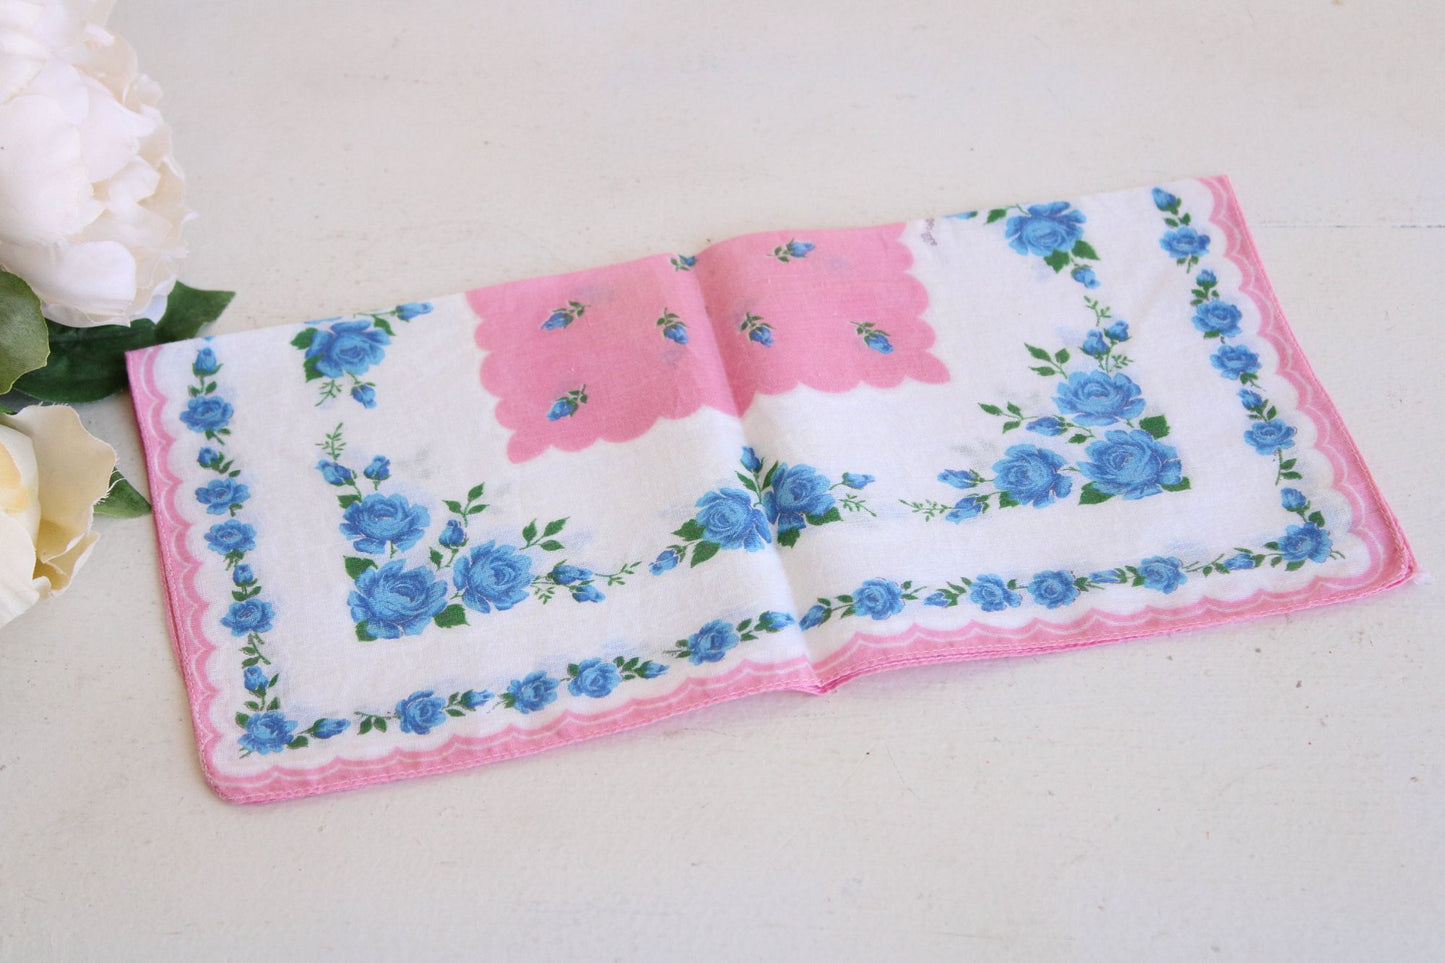 Vintage Blue Roses and Pink Flower Print Cotton Hanky